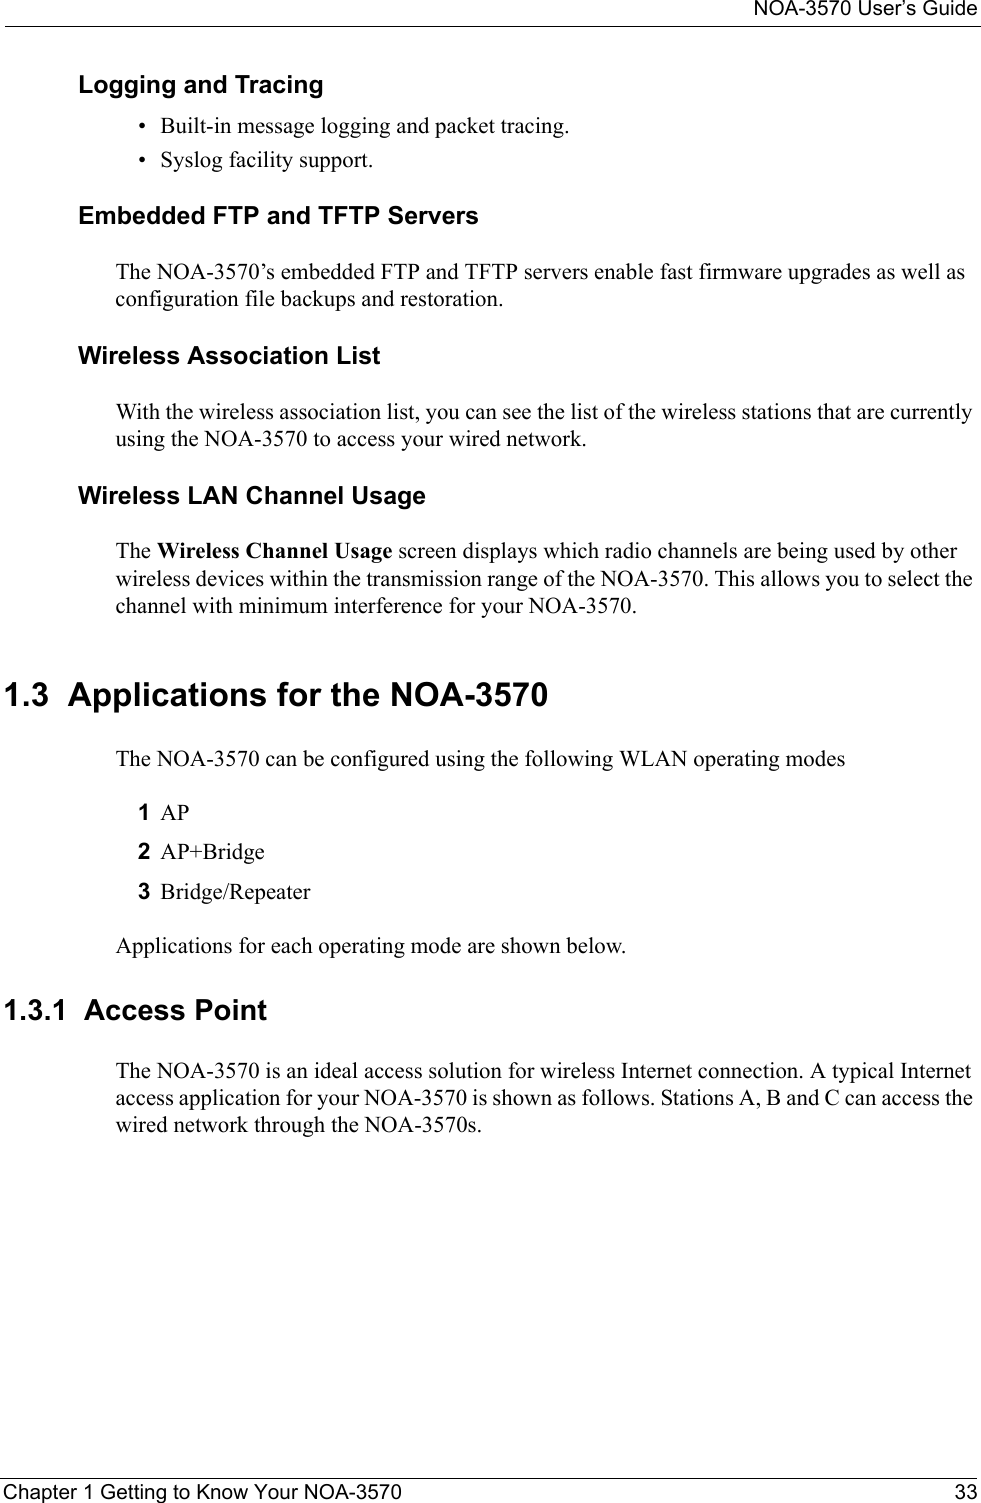 NOA-3570 User’s GuideChapter 1 Getting to Know Your NOA-3570 33Logging and Tracing• Built-in message logging and packet tracing.• Syslog facility support.Embedded FTP and TFTP ServersThe NOA-3570’s embedded FTP and TFTP servers enable fast firmware upgrades as well as configuration file backups and restoration.Wireless Association List With the wireless association list, you can see the list of the wireless stations that are currently using the NOA-3570 to access your wired network.Wireless LAN Channel UsageThe Wireless Channel Usage screen displays which radio channels are being used by other wireless devices within the transmission range of the NOA-3570. This allows you to select the channel with minimum interference for your NOA-3570.1.3  Applications for the NOA-3570The NOA-3570 can be configured using the following WLAN operating modes1AP2AP+Bridge3Bridge/RepeaterApplications for each operating mode are shown below.1.3.1  Access Point The NOA-3570 is an ideal access solution for wireless Internet connection. A typical Internet access application for your NOA-3570 is shown as follows. Stations A, B and C can access the wired network through the NOA-3570s.